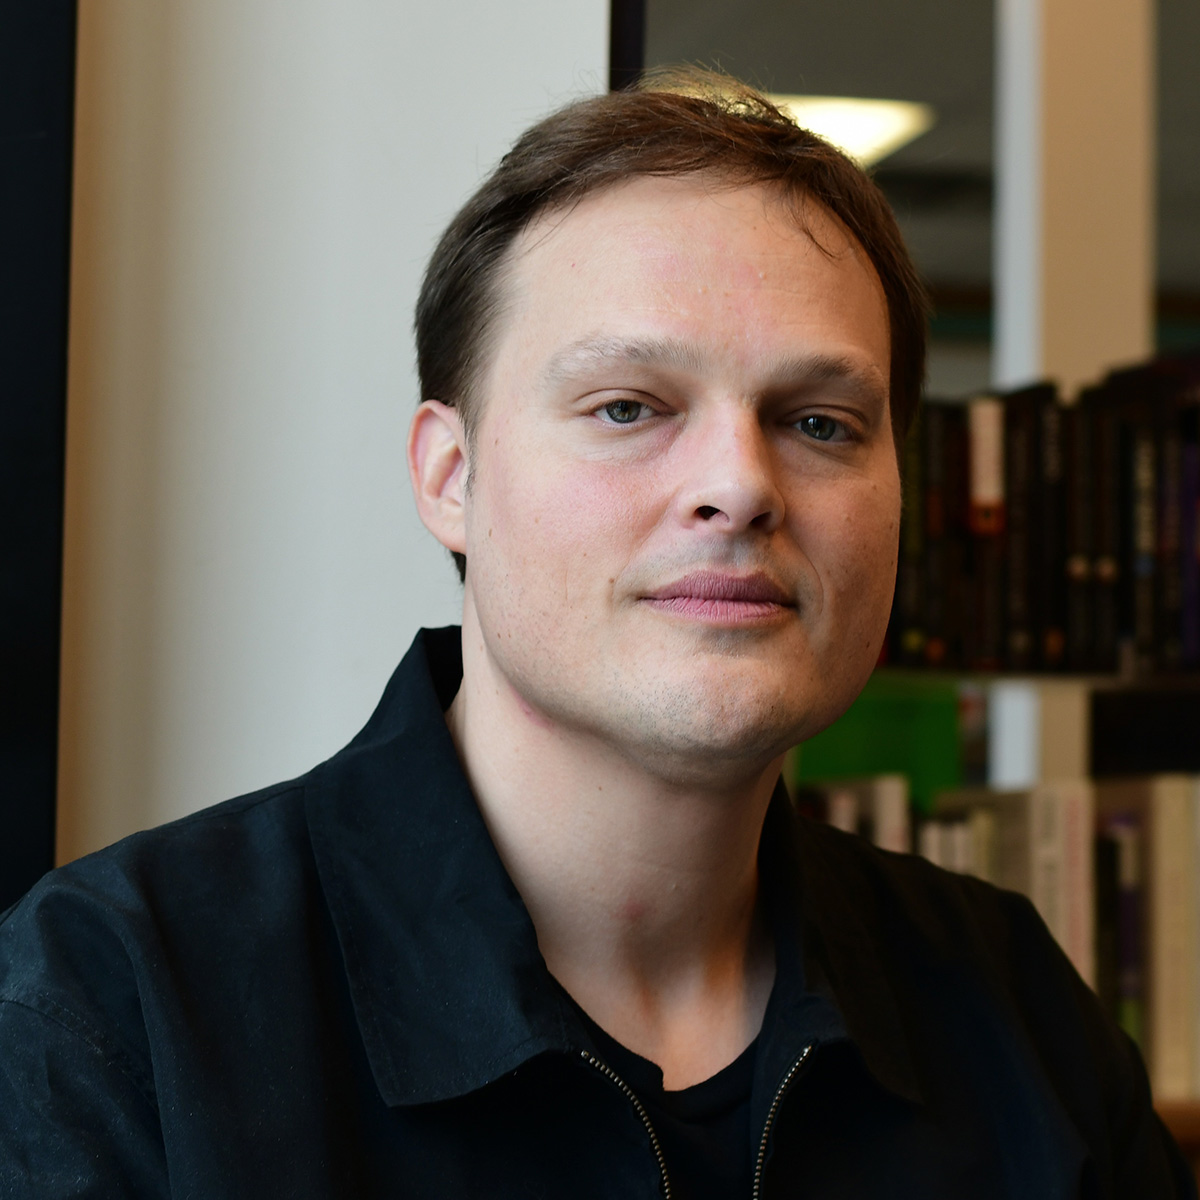 Garth Greenwell wearing a black collared shirt in front of a bookcase.